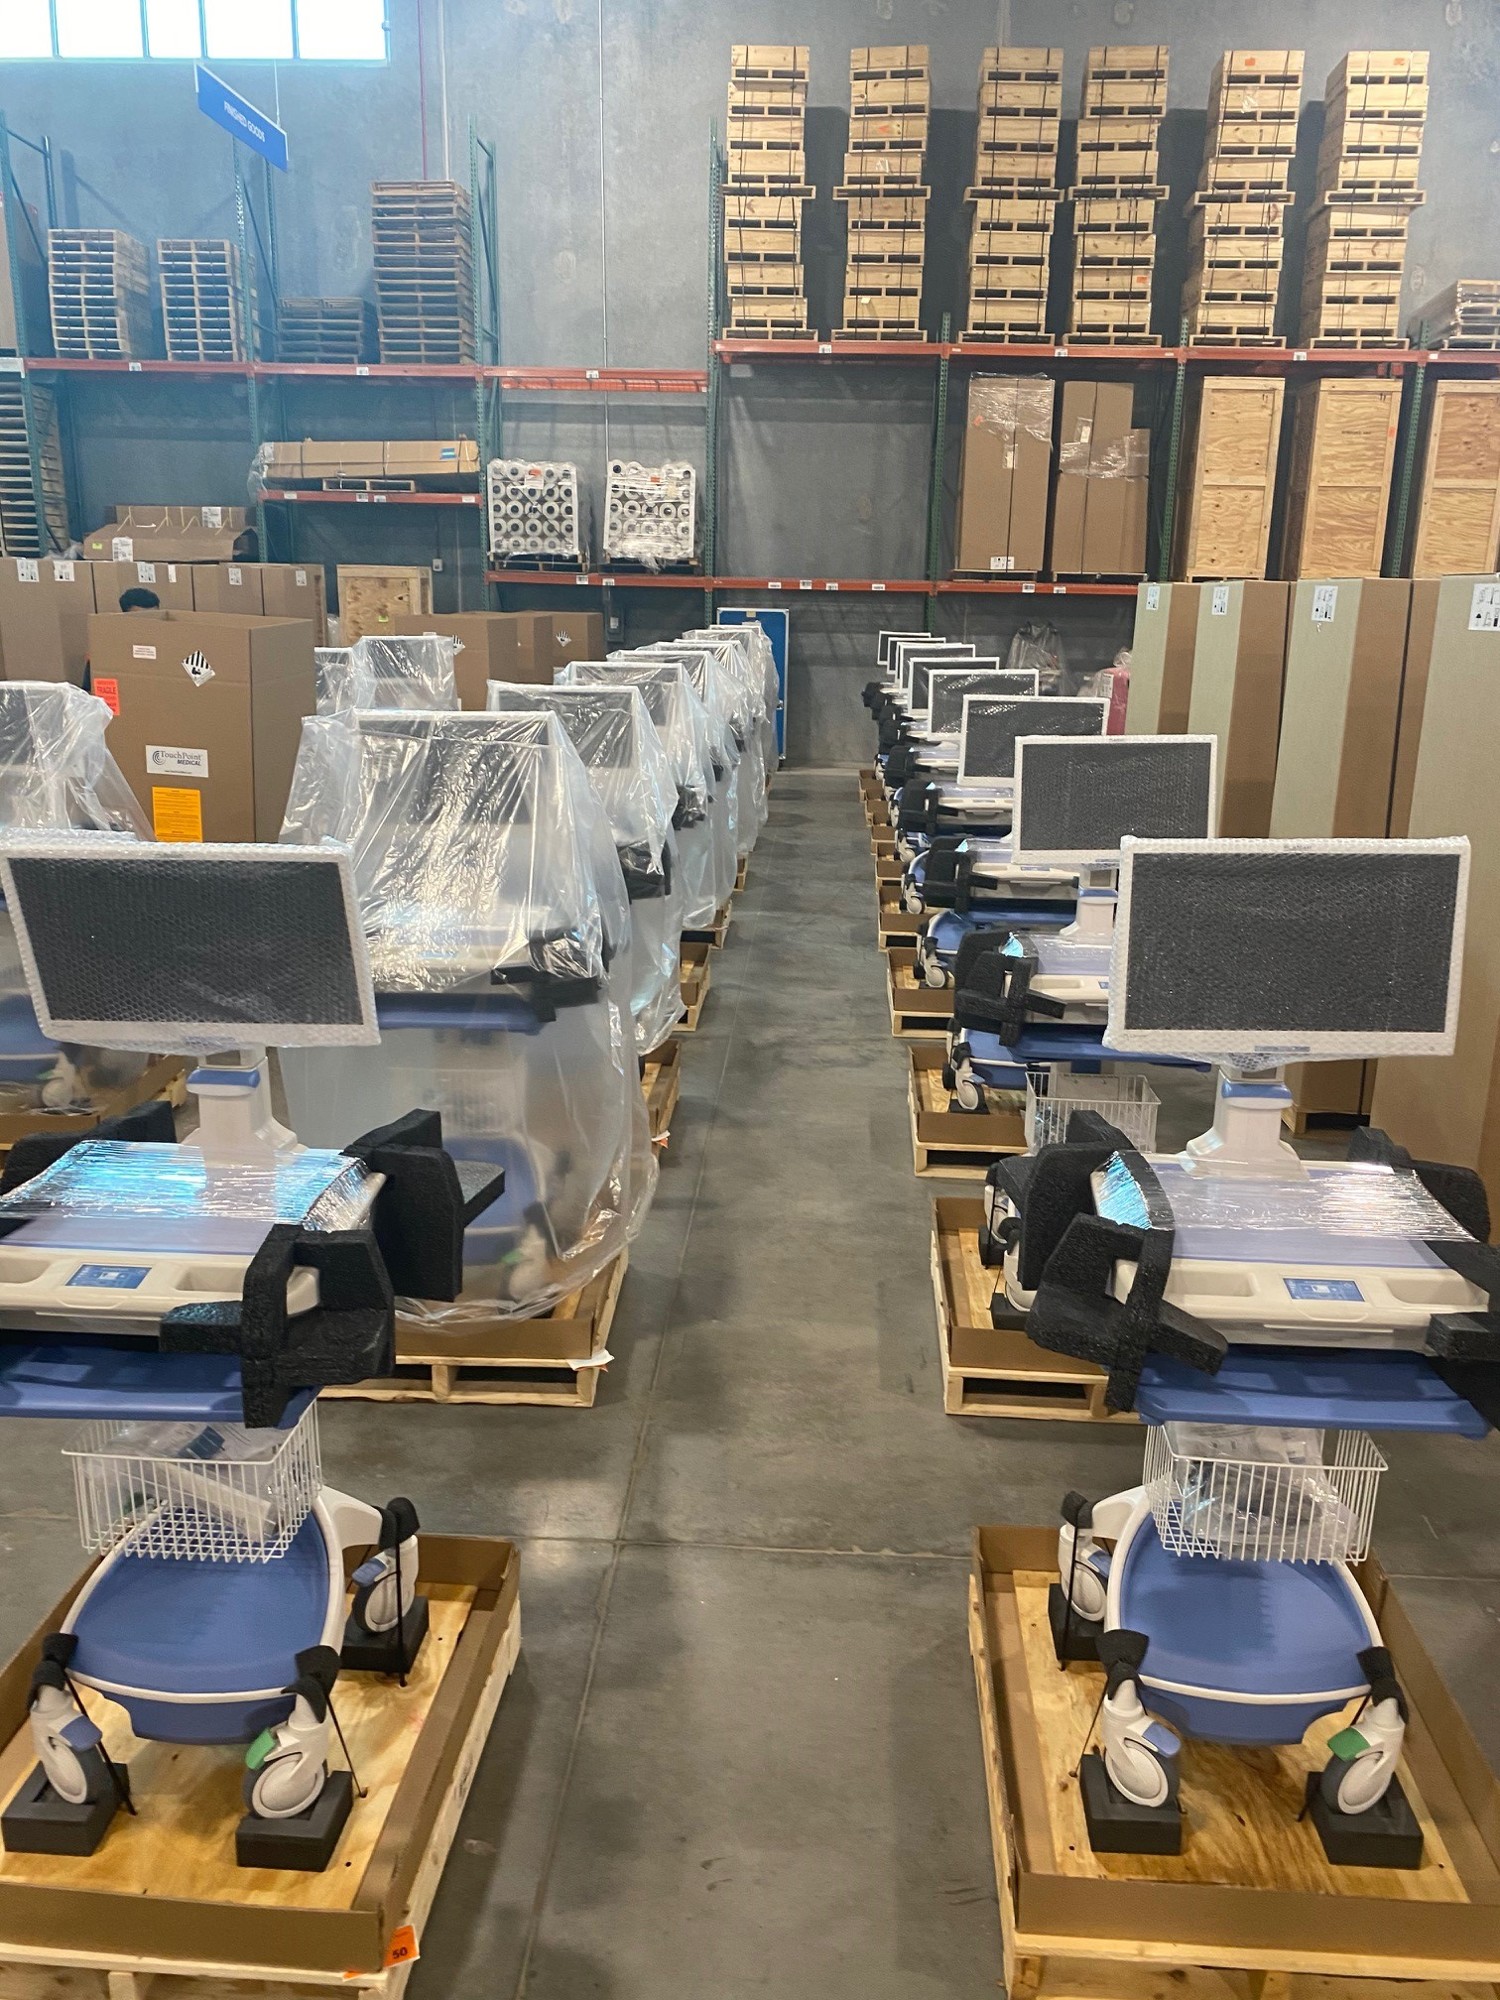 TouchPoint Medical workflow carts ready to be shipped to hospitals and other health care providers around the country. The carts are in high demand amid the COVID-19 crisis. Courtesy photo.